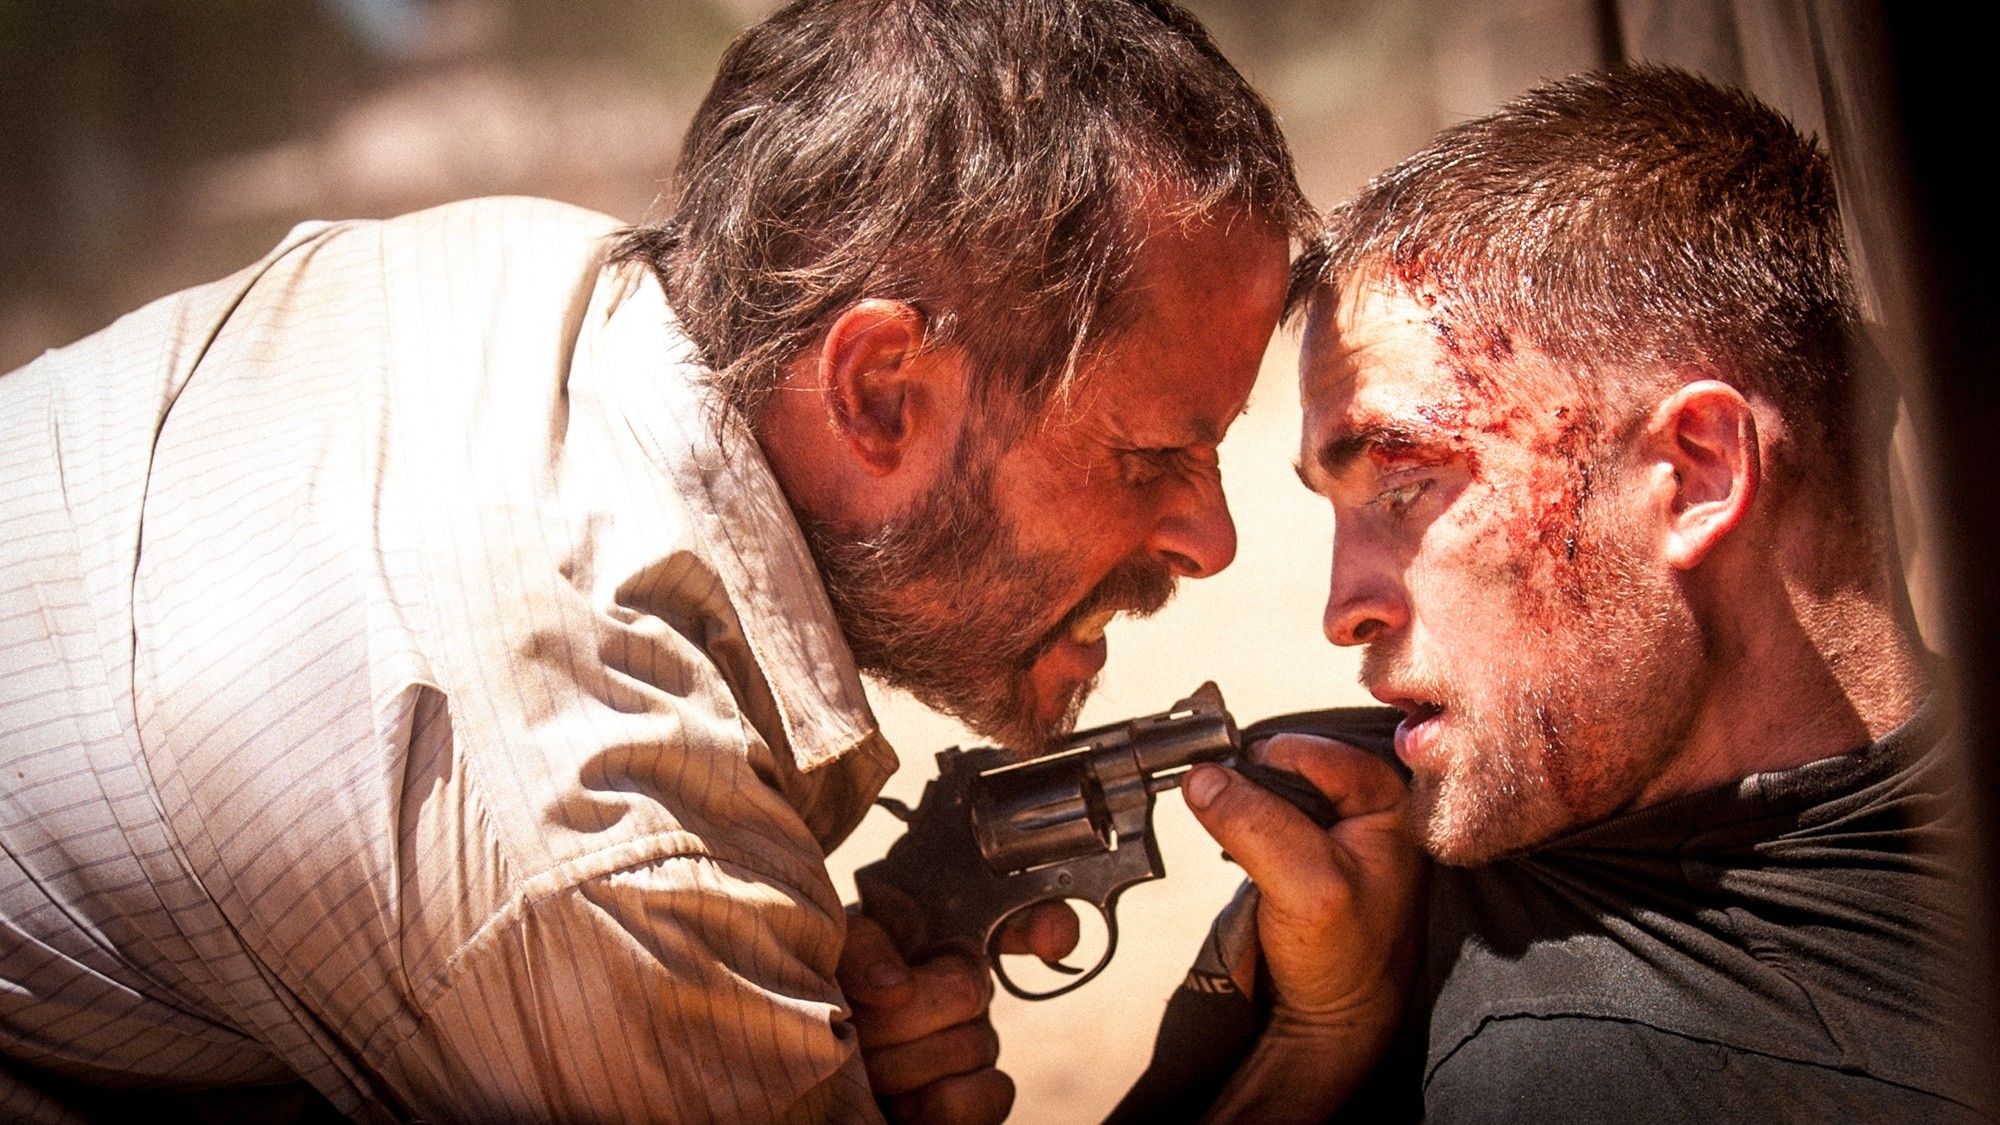 Guy Pearce stars as Eric and Robert Pattinson stars as Reynolds in A24's The Rover (2014)